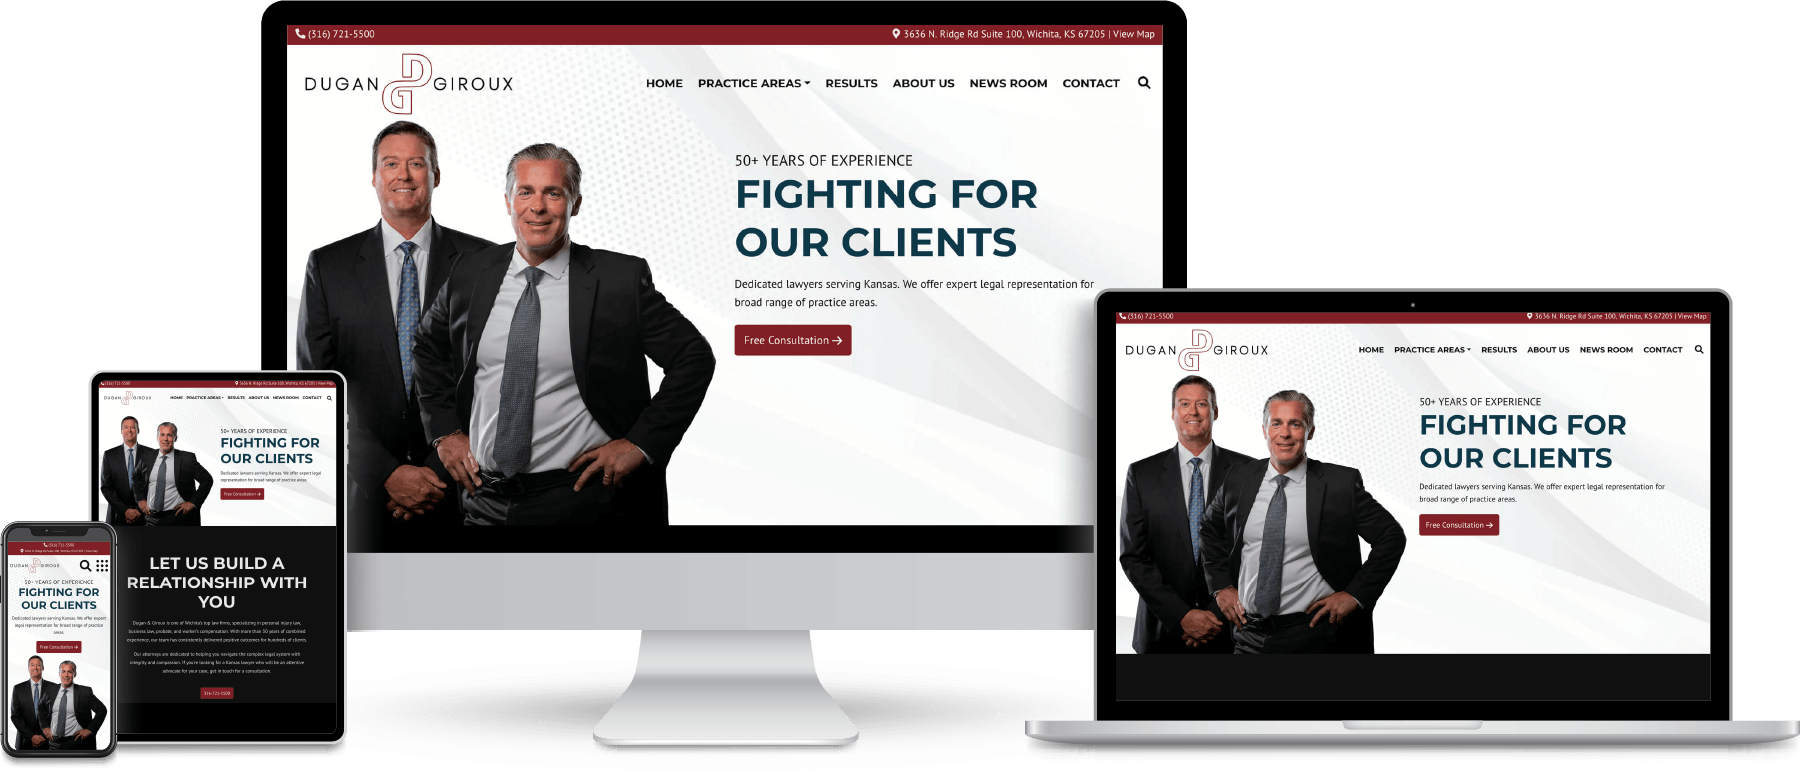 Dugan & Giroux website shown on desktop, laptop, tablet and mobile devices.